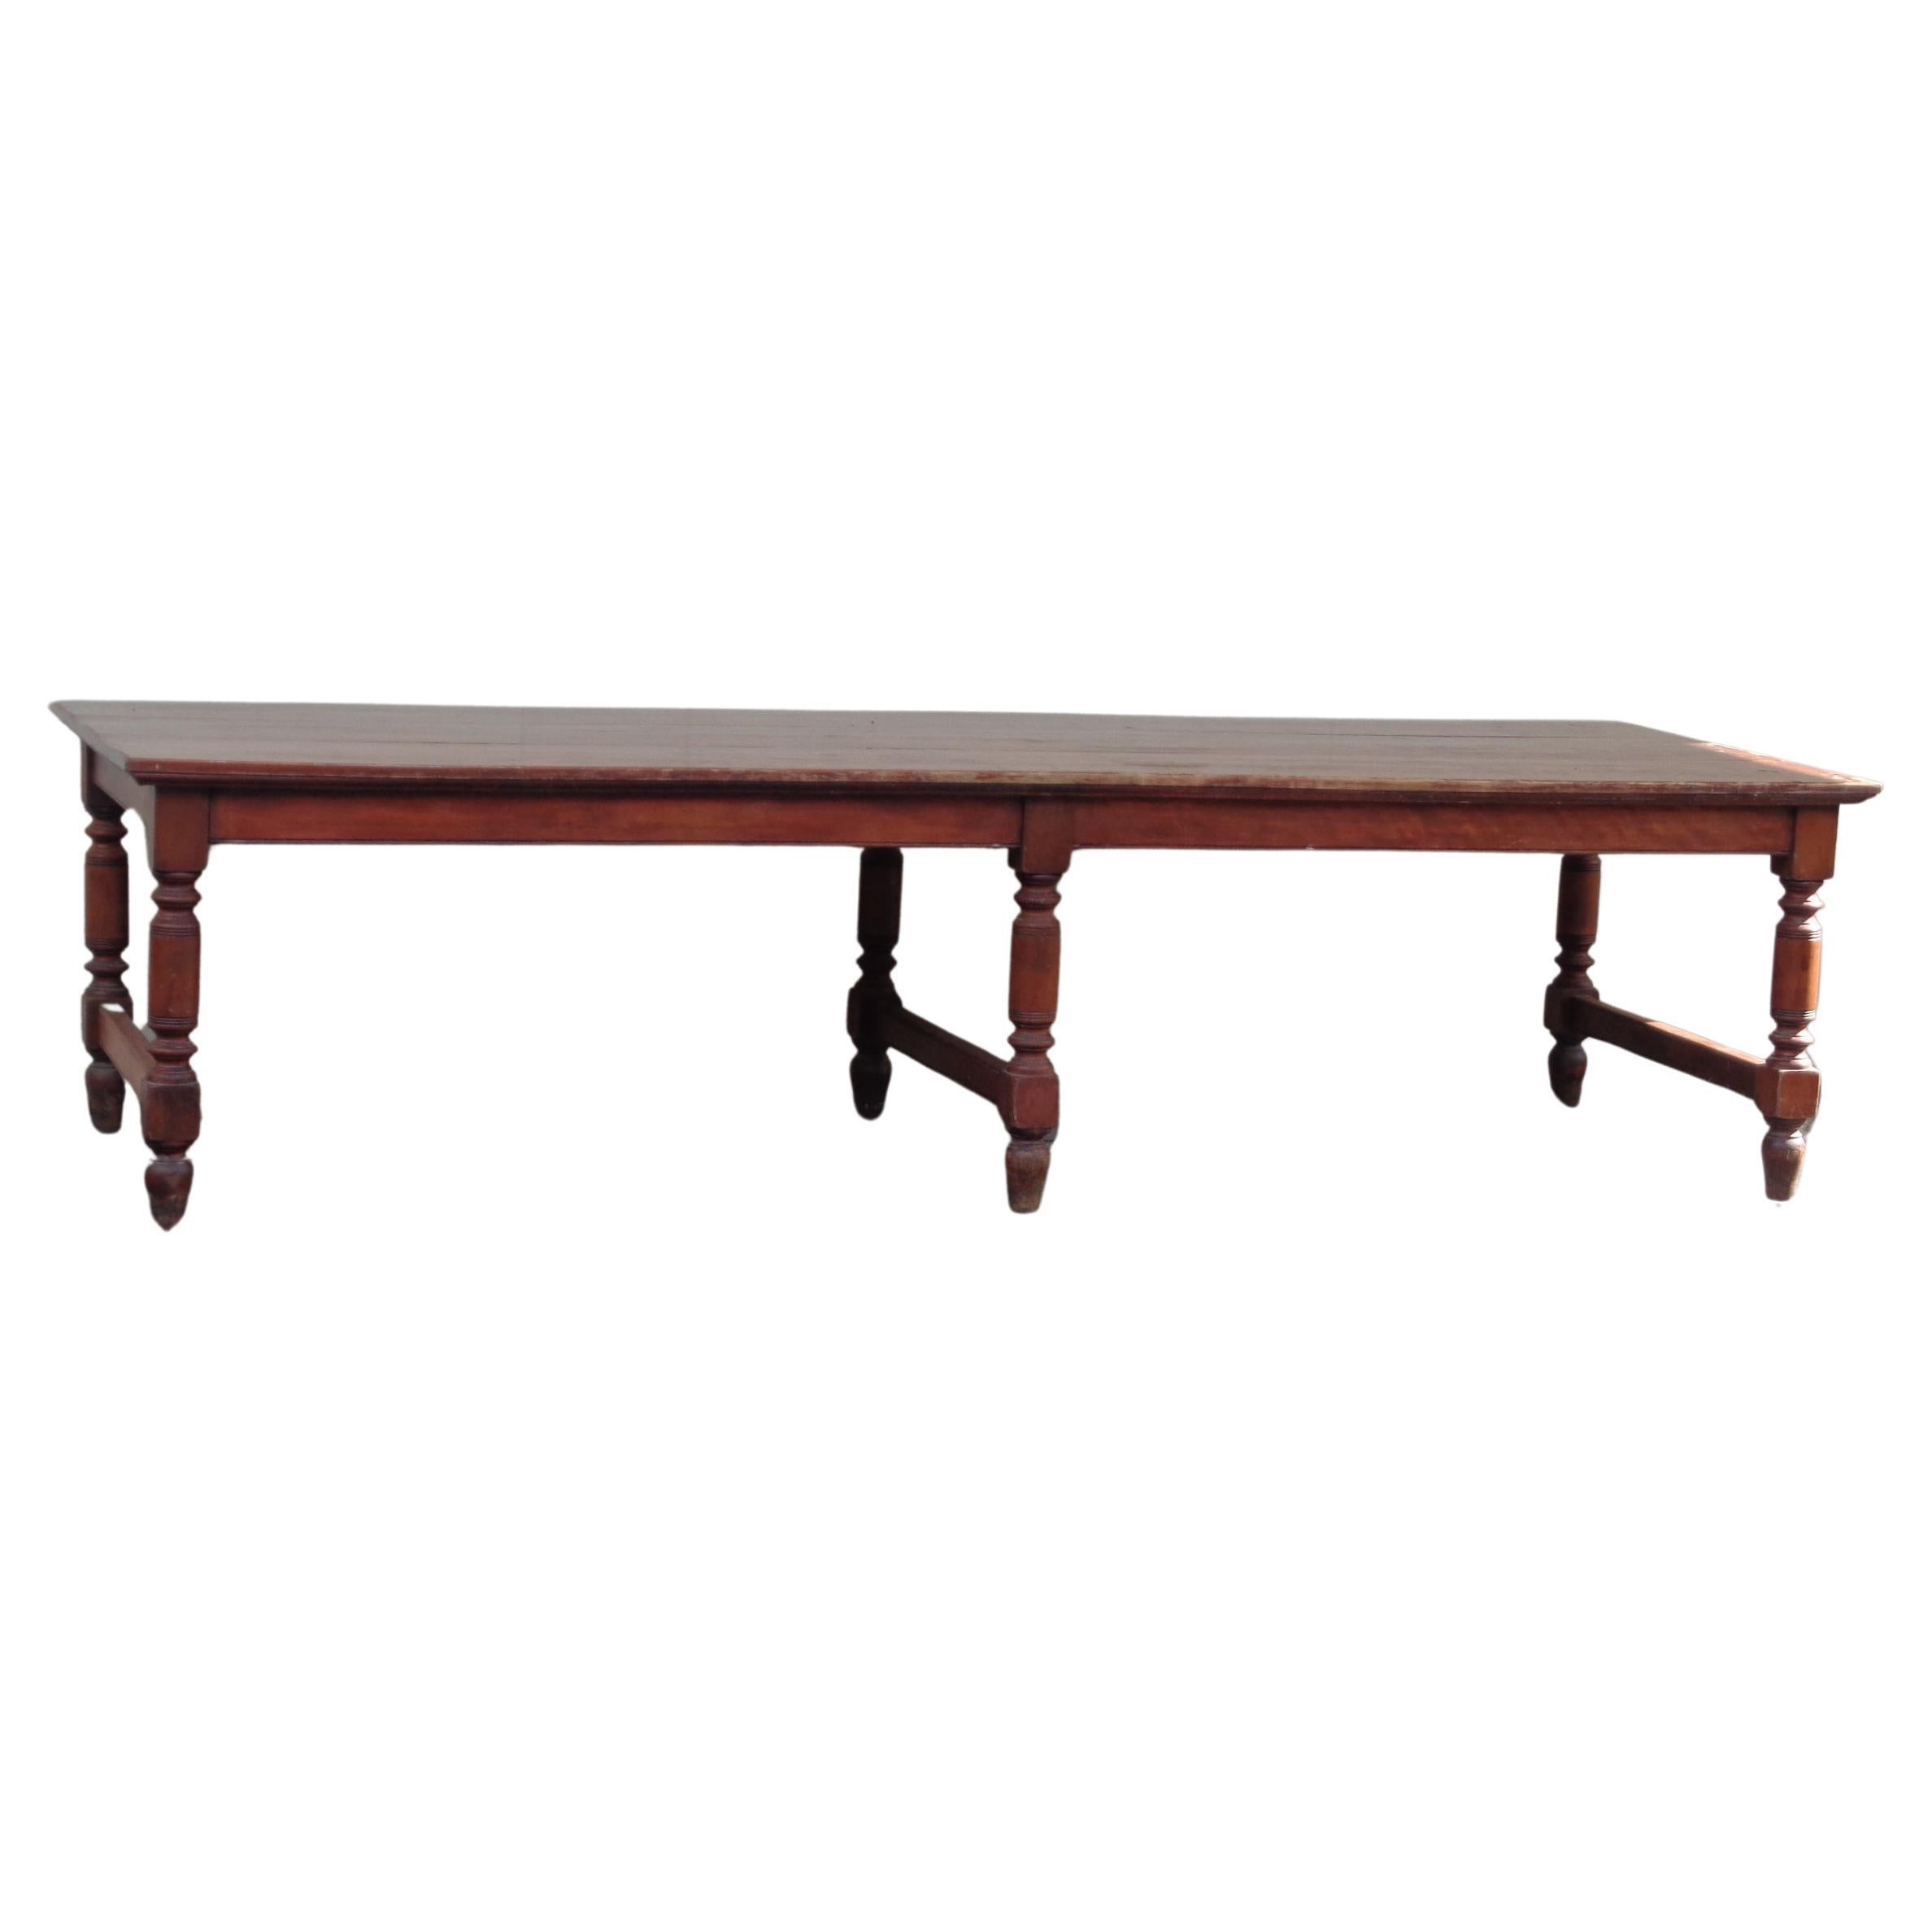 Antique American Banquet Dining Table, 1870-1880 For Sale 3